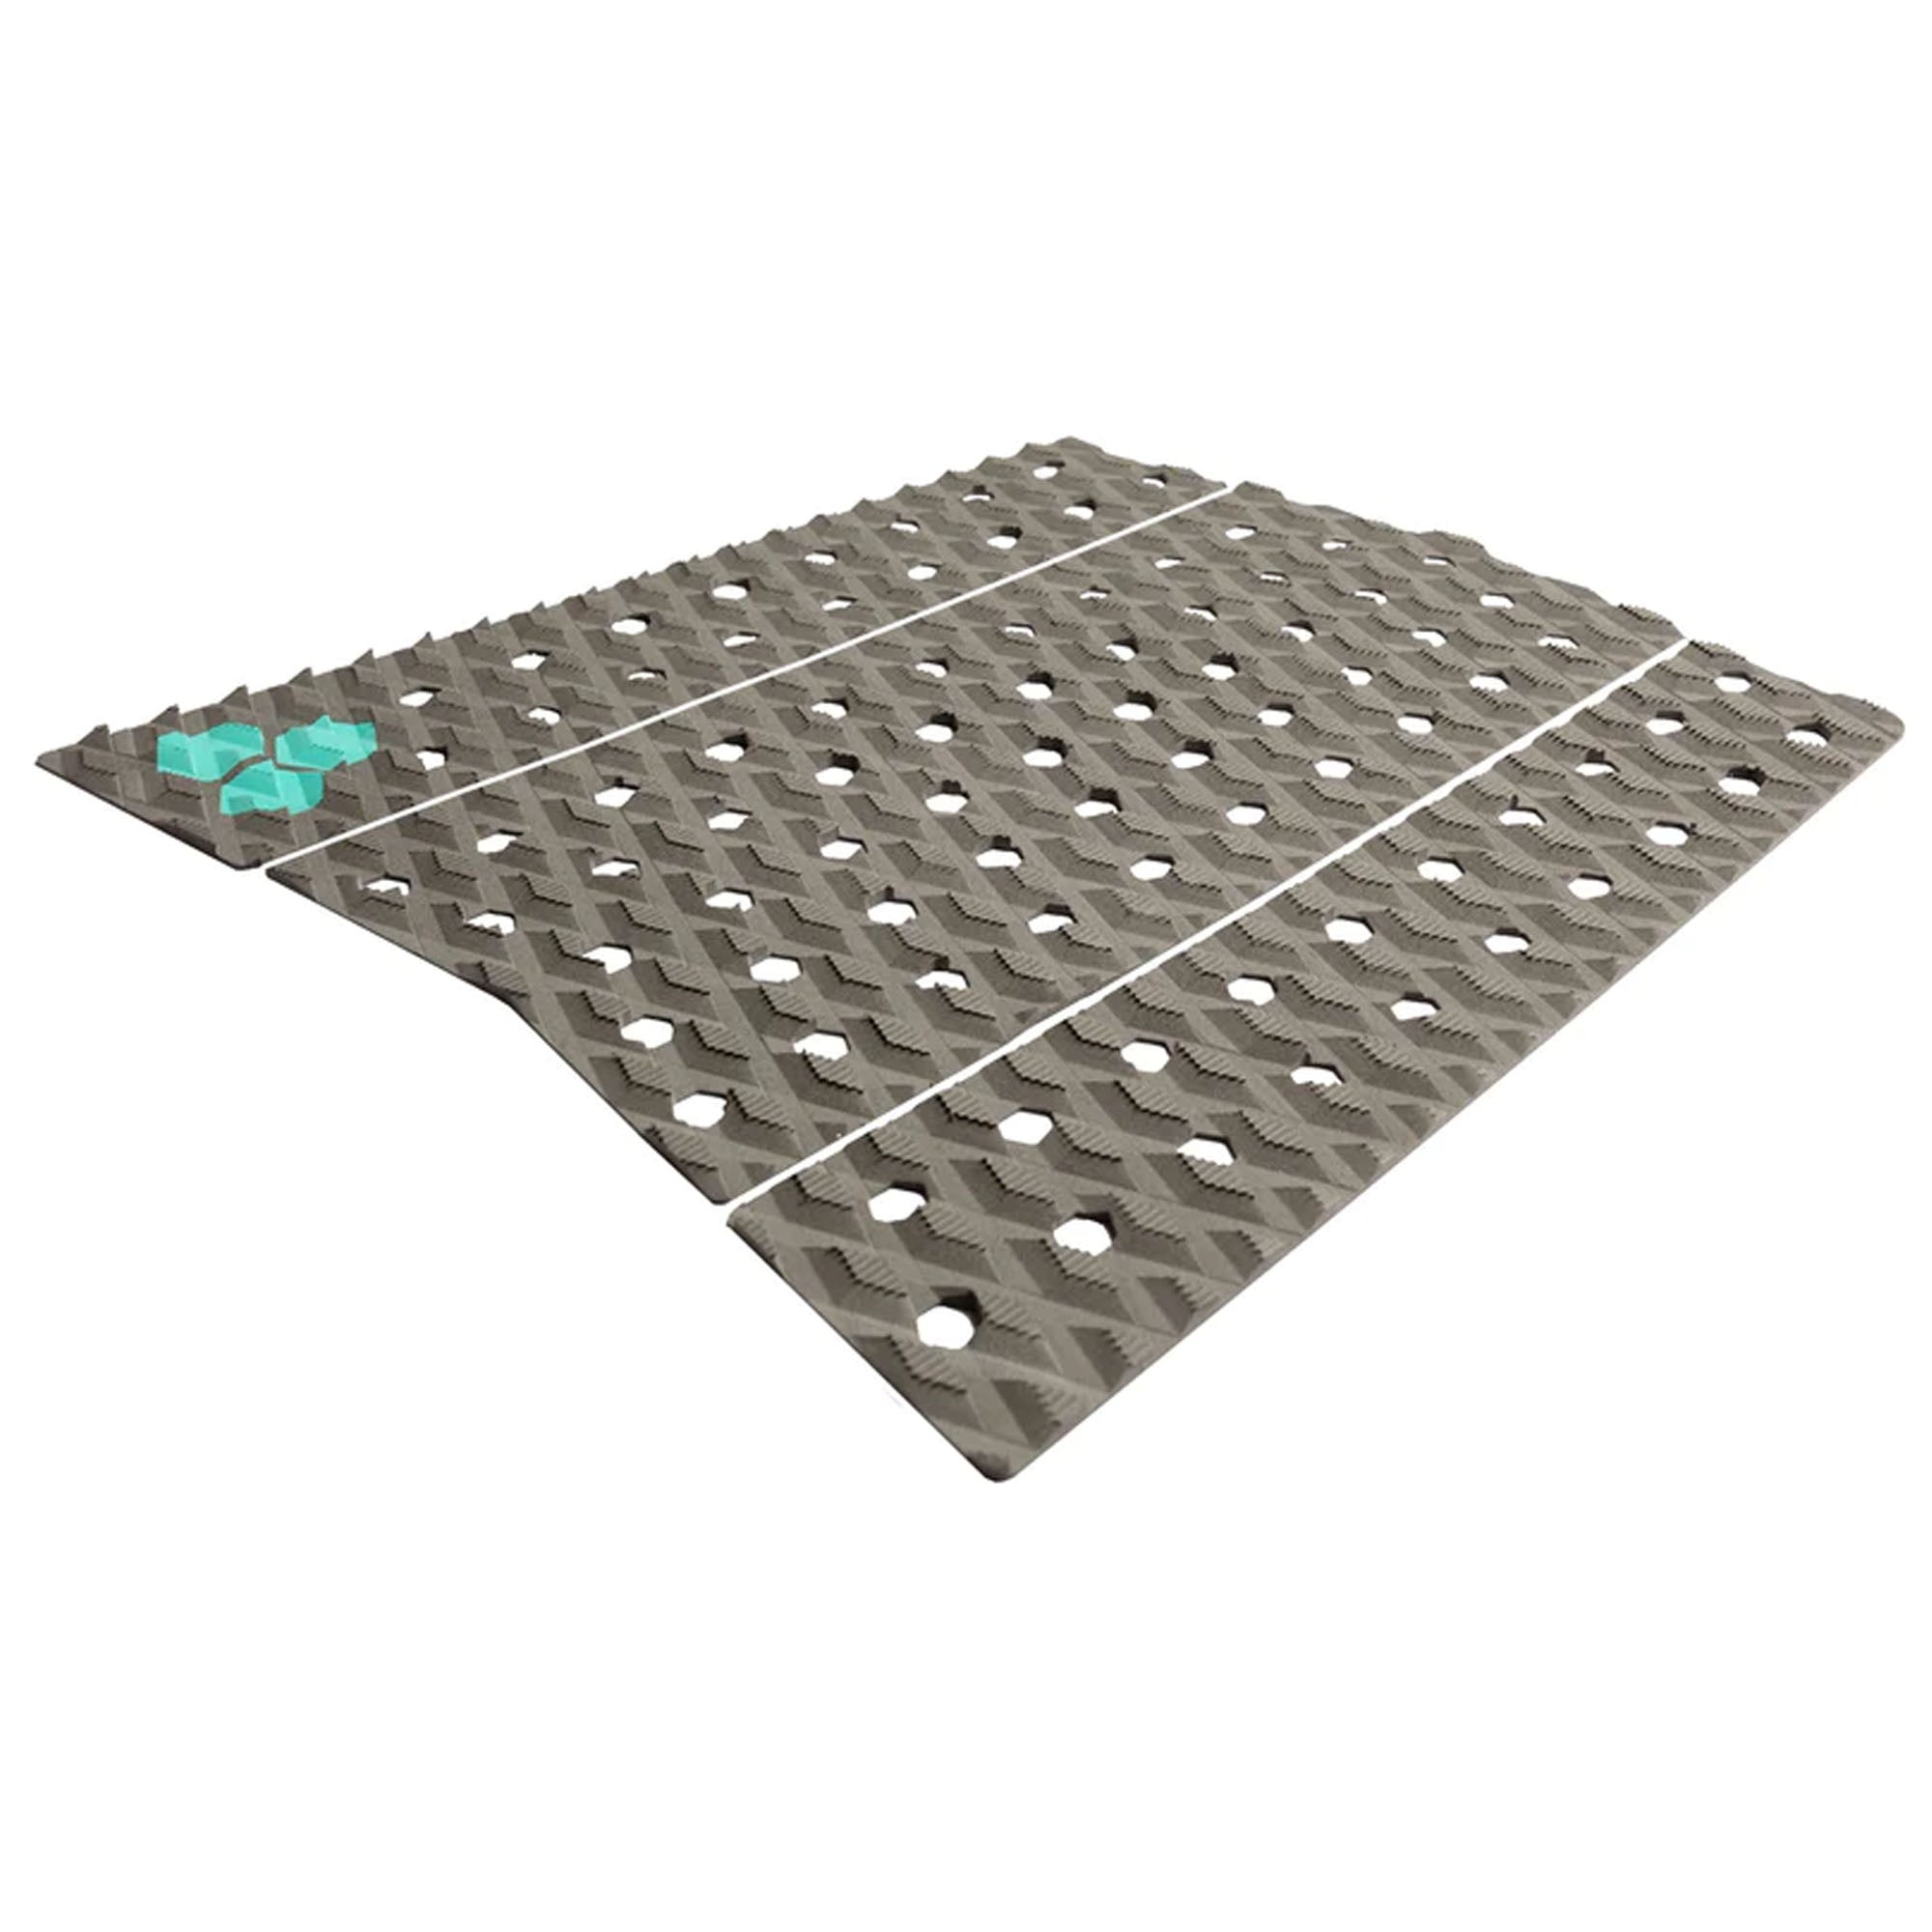 Channel Islands Reef Heazlewood Front Traction Pad